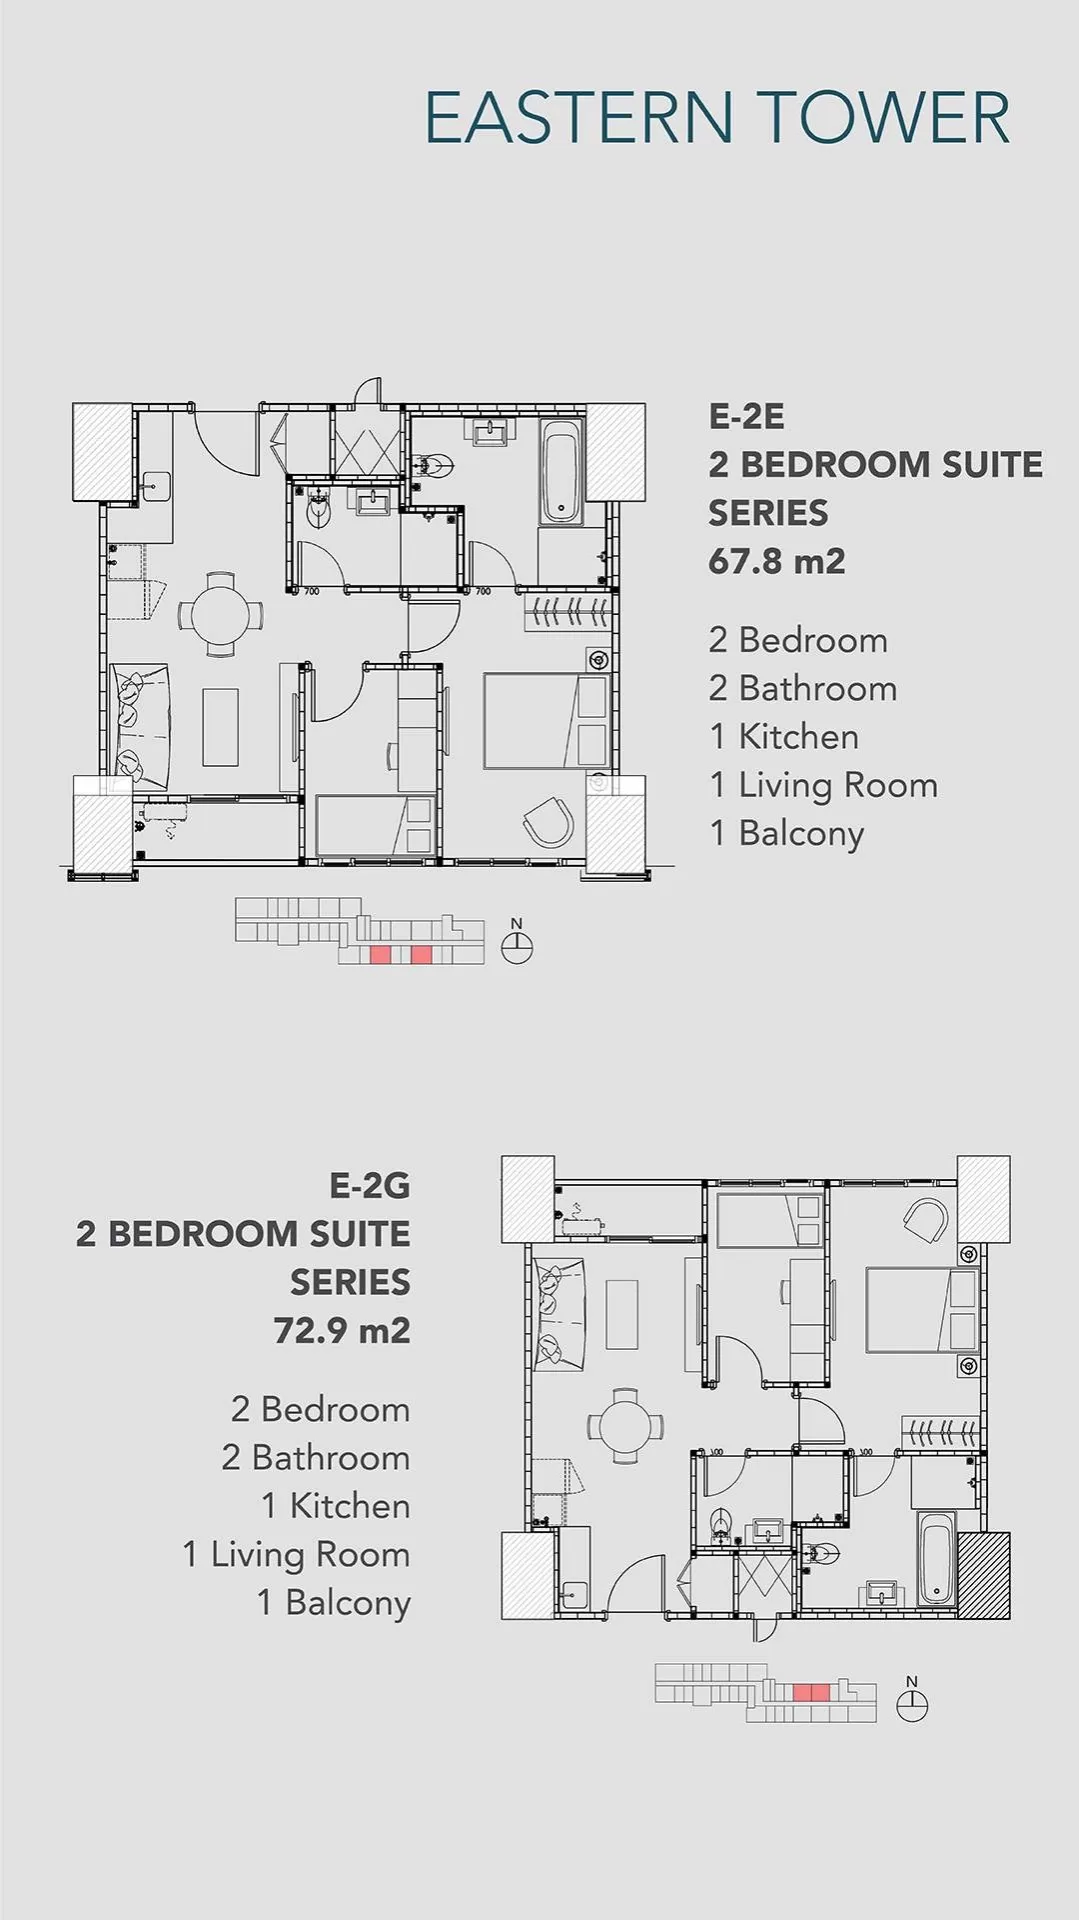 Unit-Type-Eastern-Tower-Embarcadero-Apartment-4